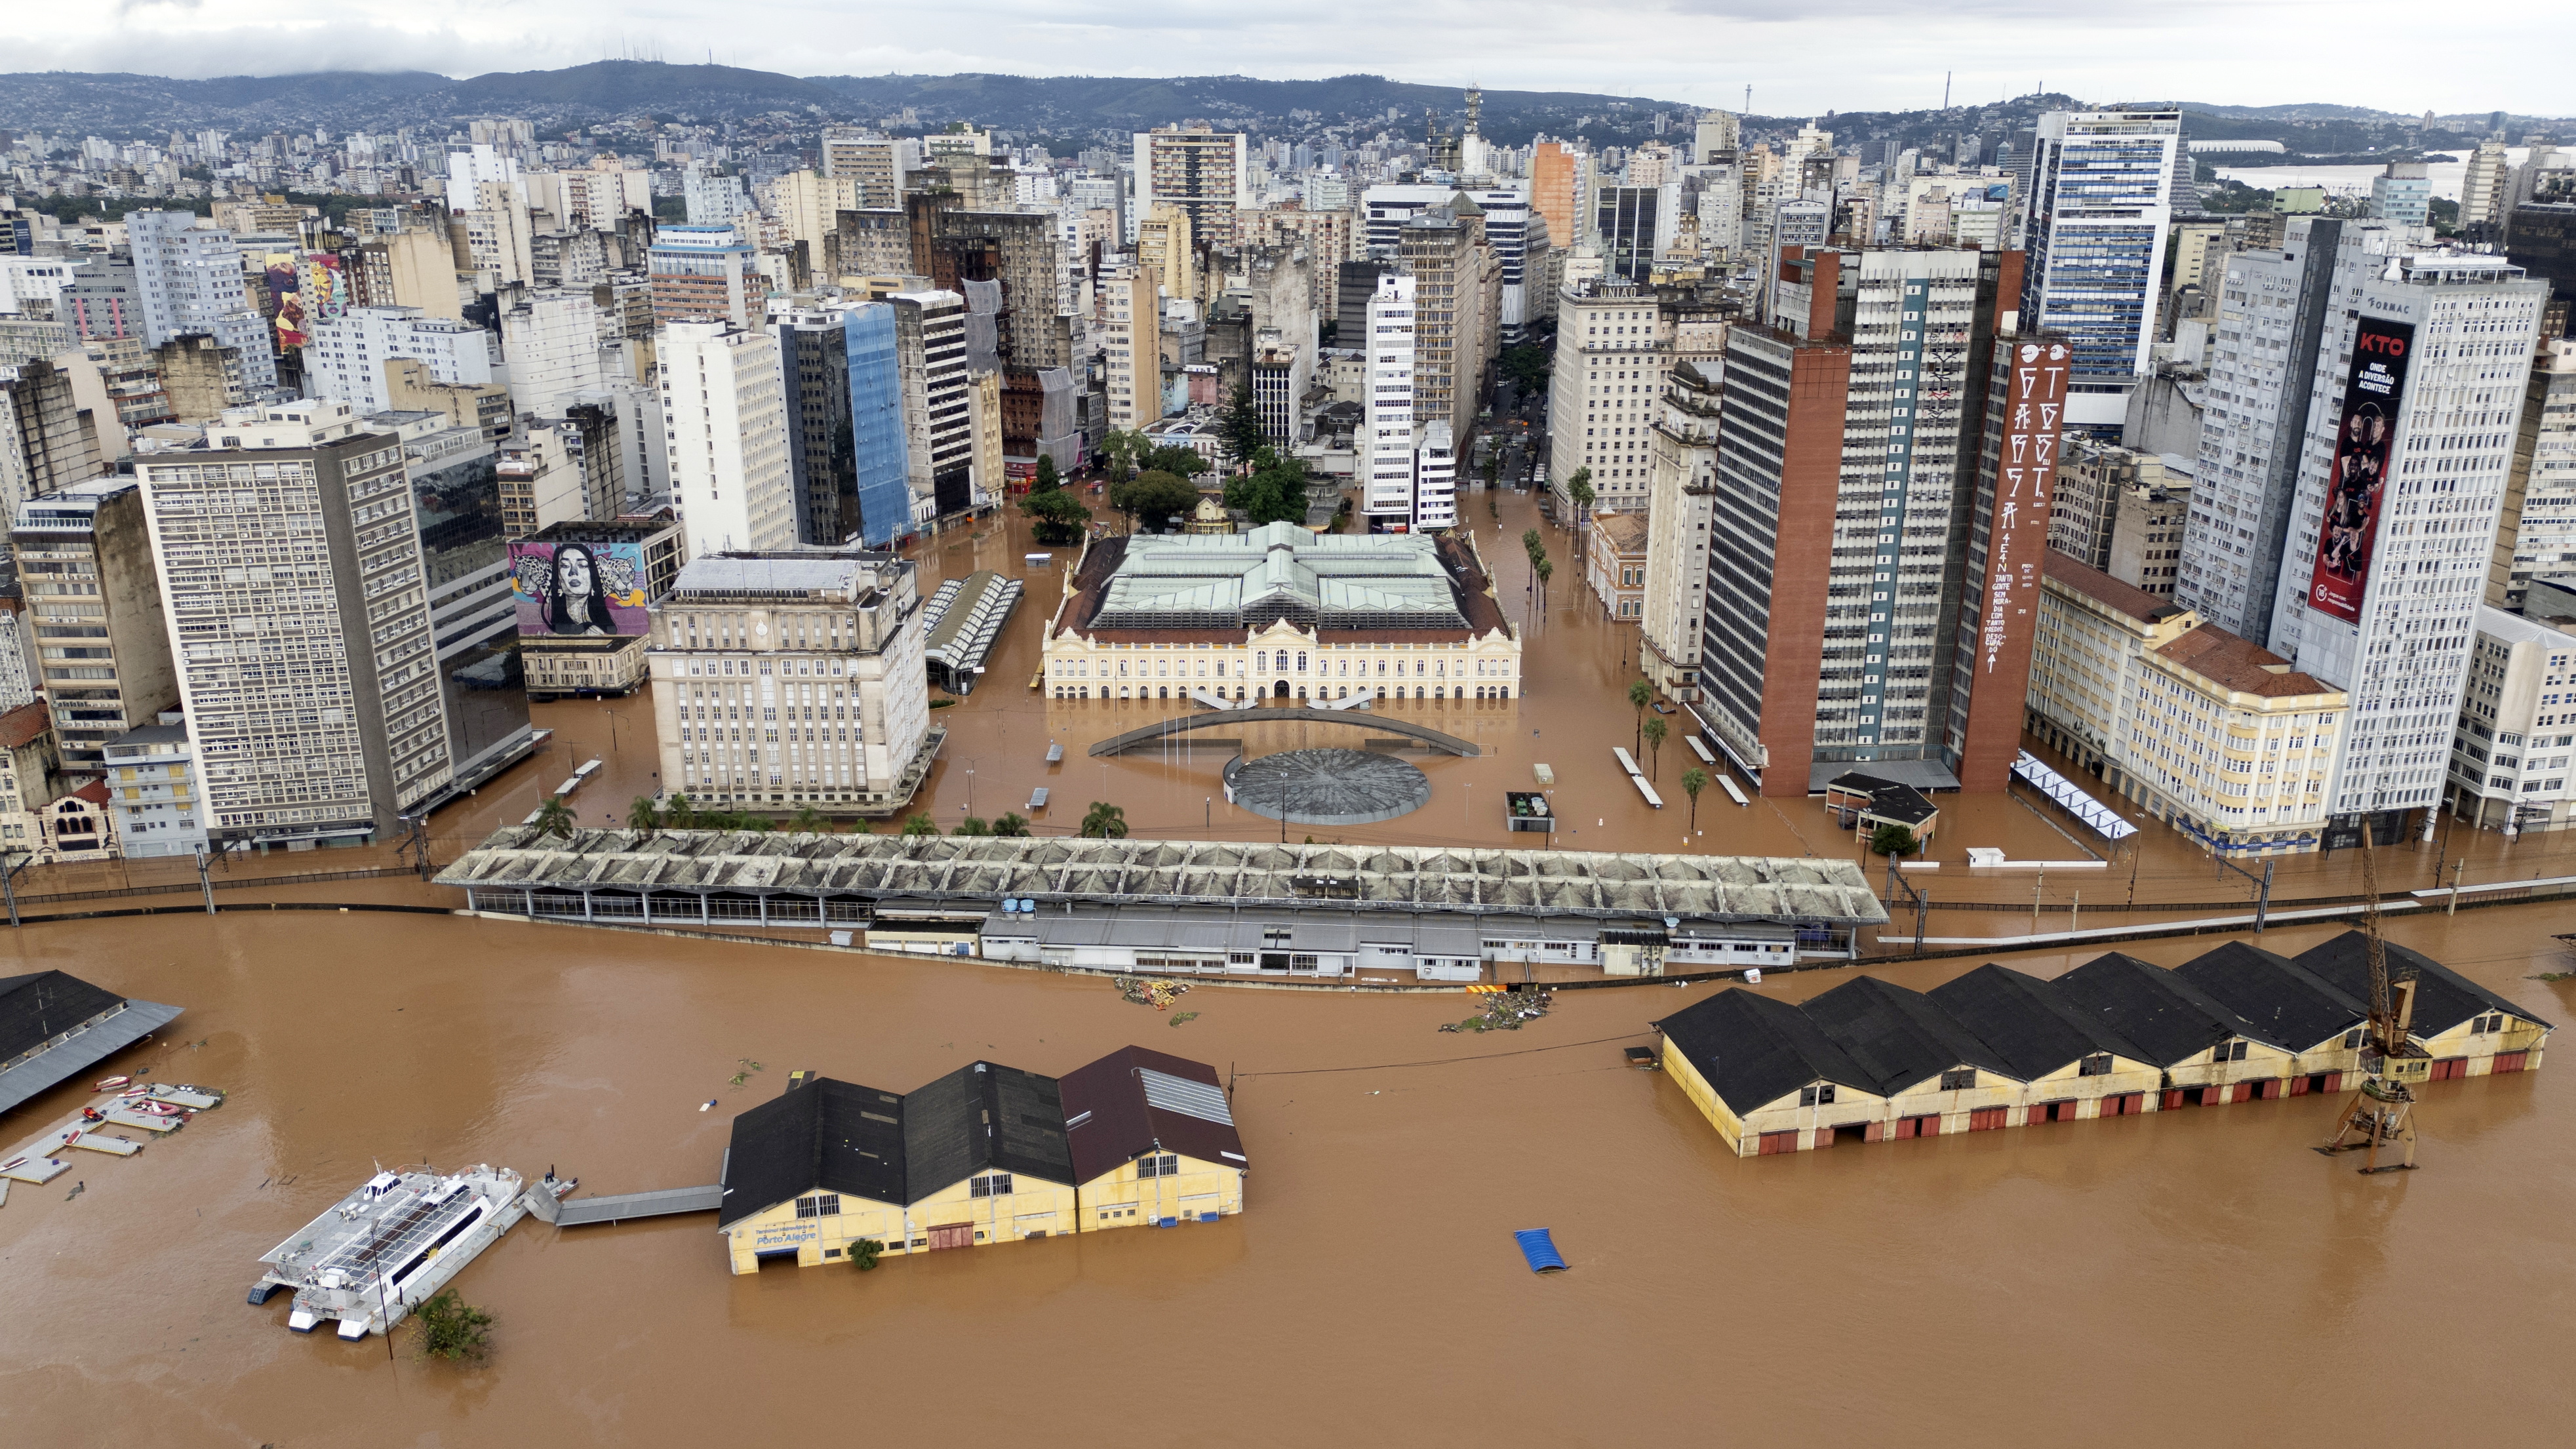 Drone photography shows the extent of the flooding at Lake Guaiba in the city of Porto Alegre in the state of Rio Grande do Sul